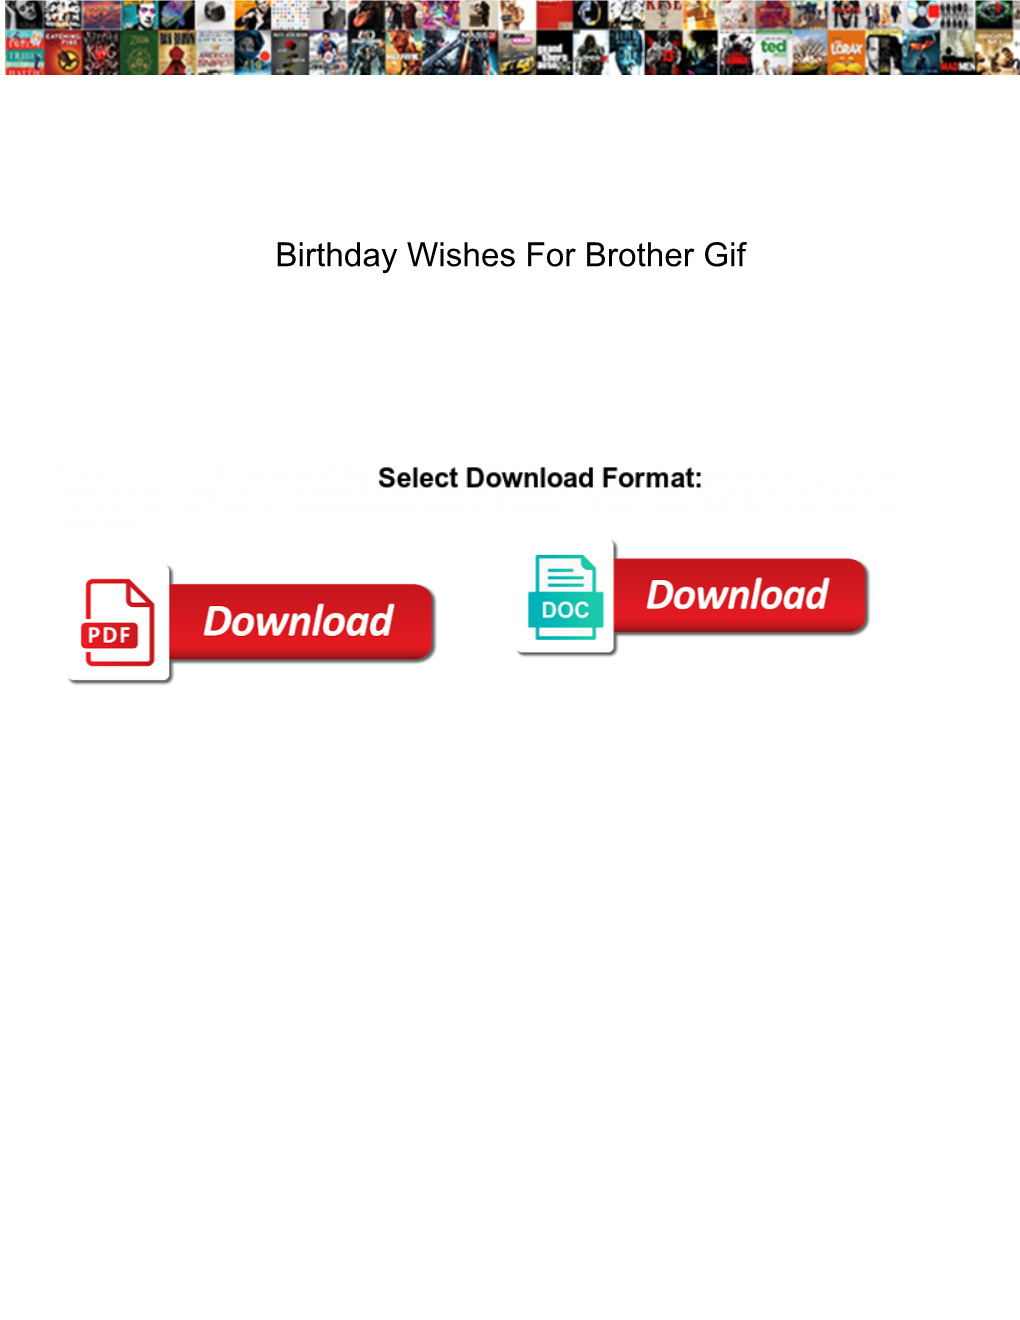 Birthday Wishes for Brother Gif